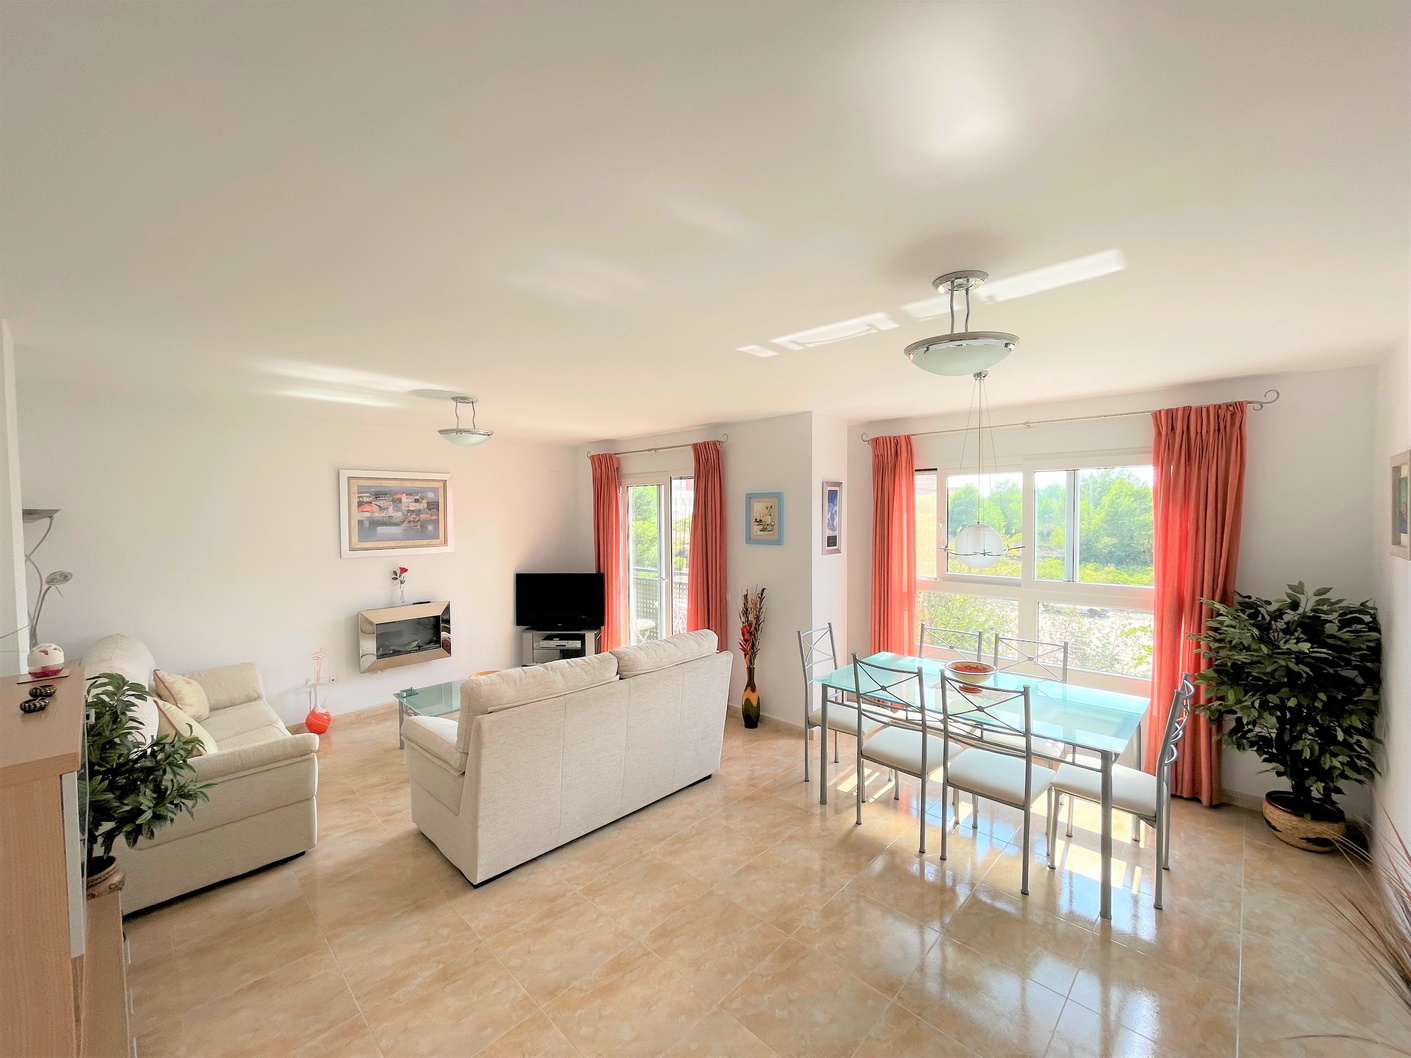 An immaculate three bedroom, two bathroom apartment in Teulada